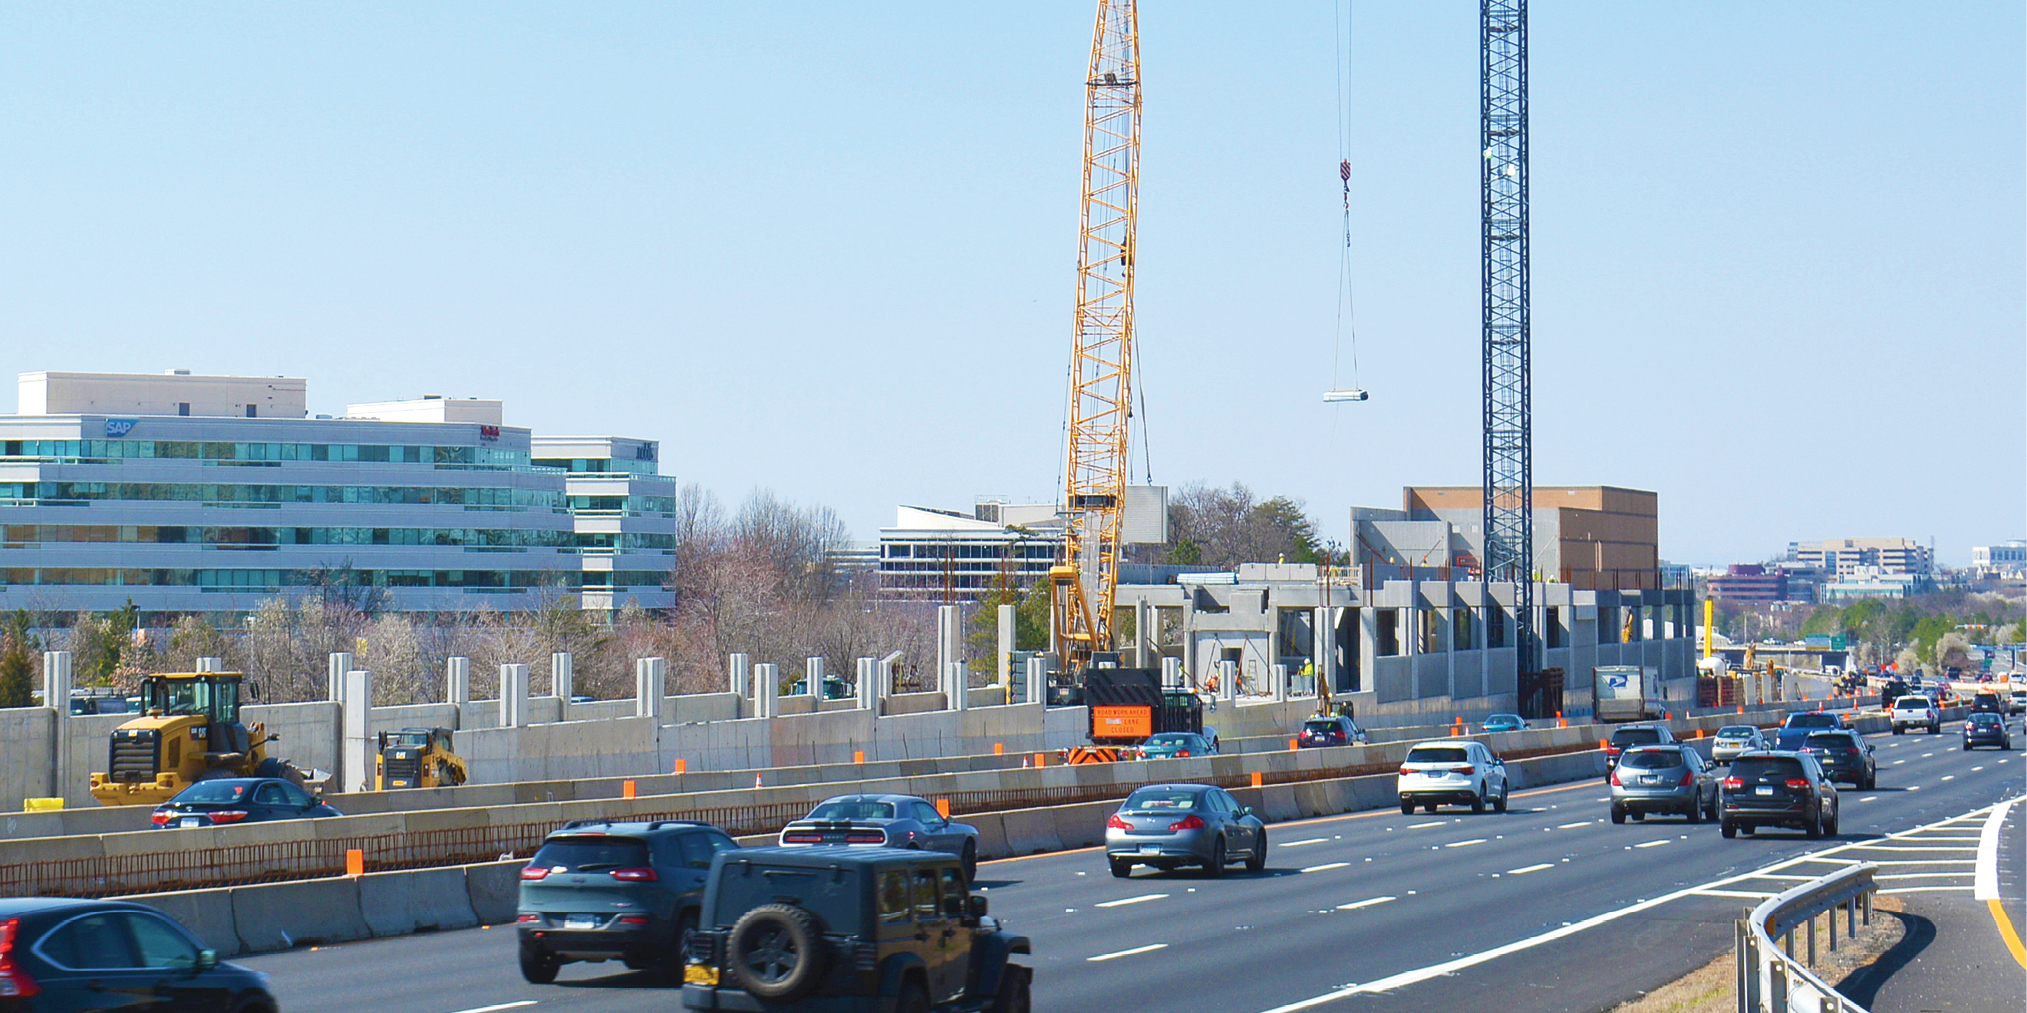 cranes used in the construction of Reston station